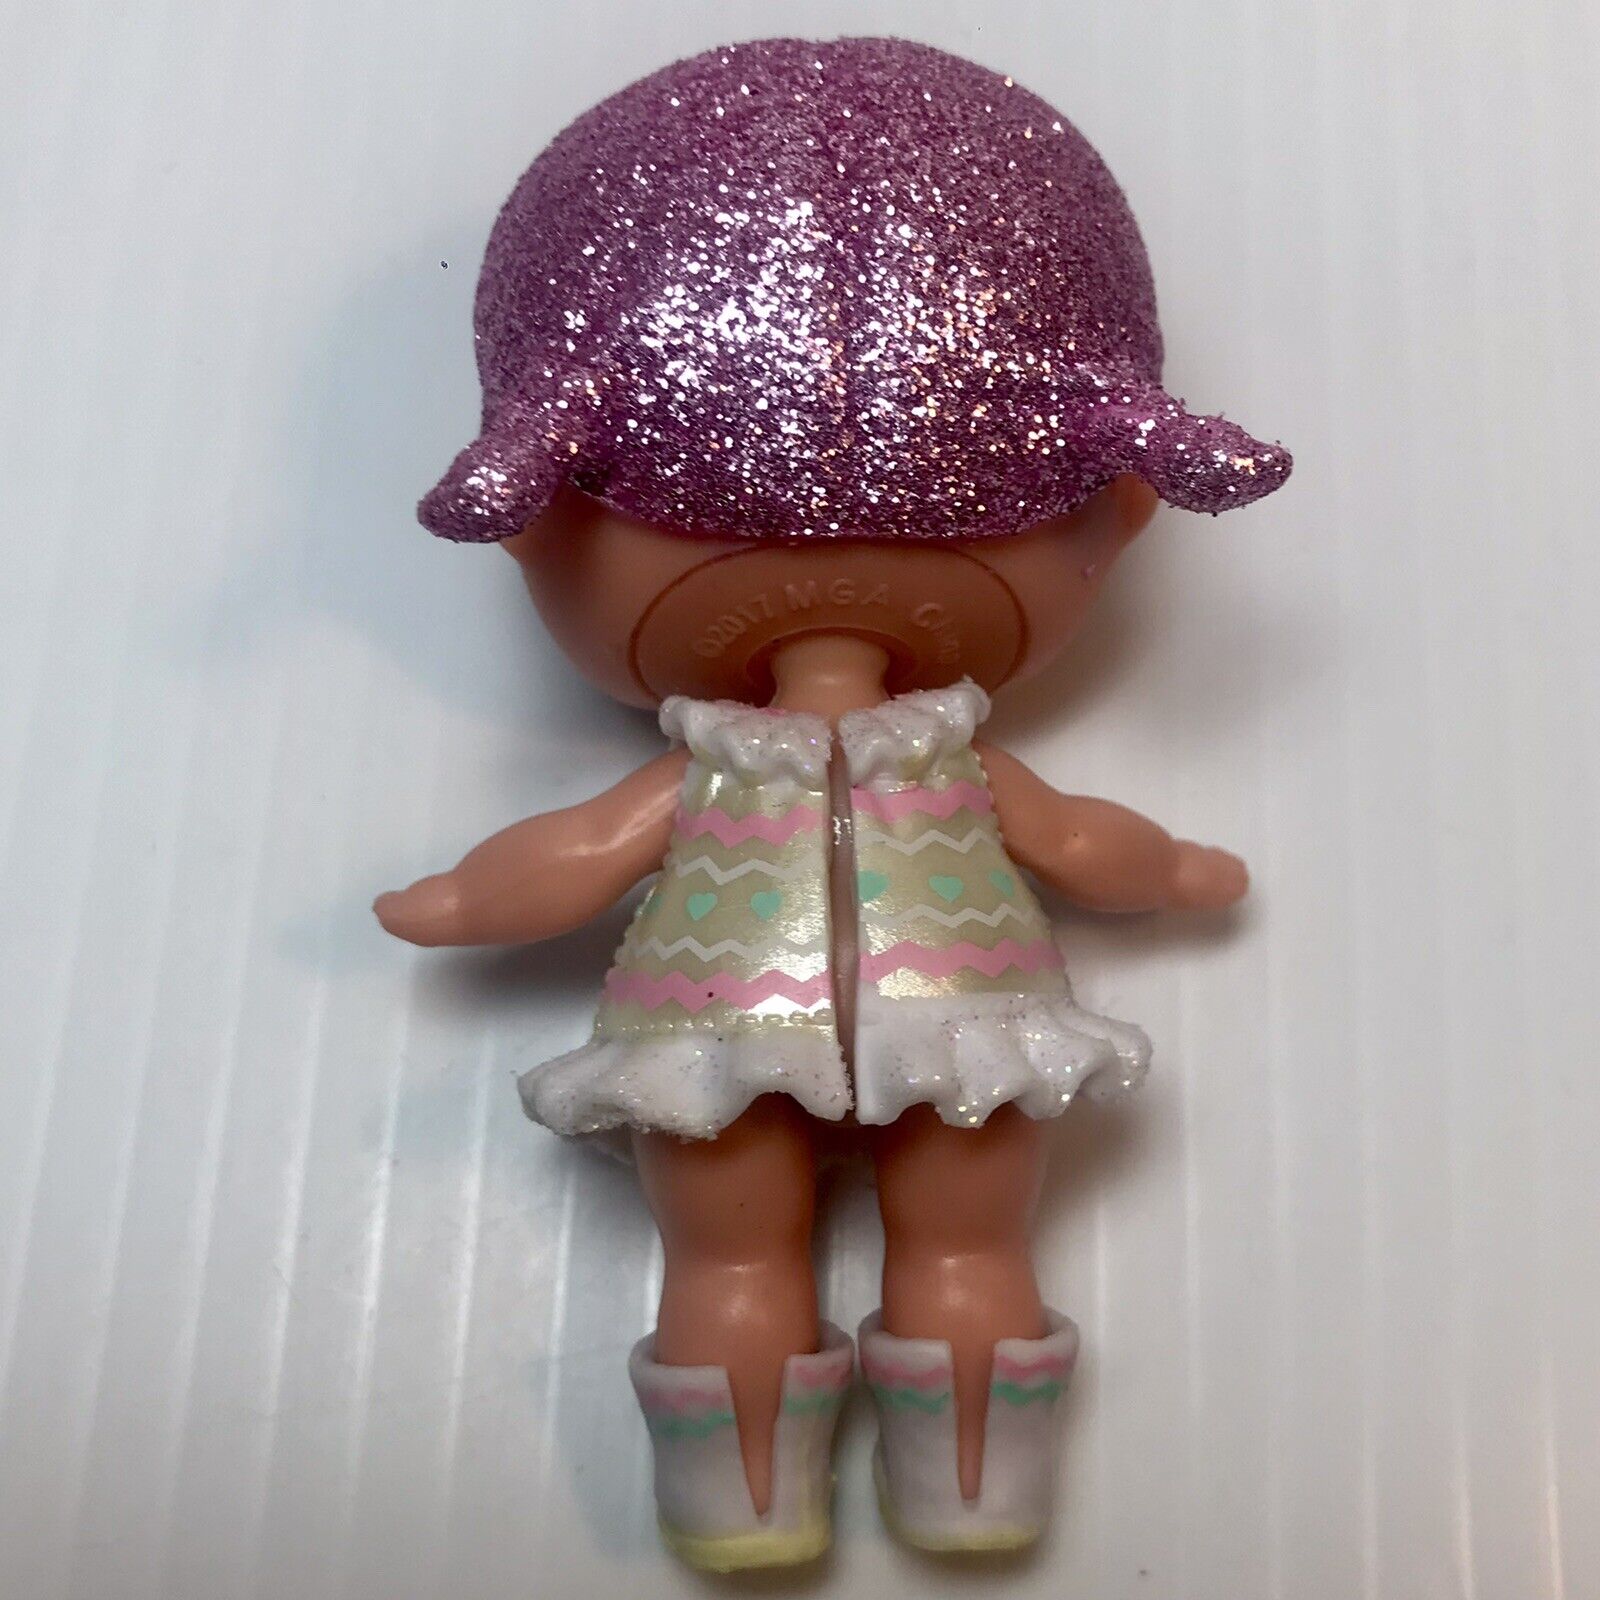 LOL Surprise Doll HOPS Spring Bling Limited Edition Easter Big Sister Baby